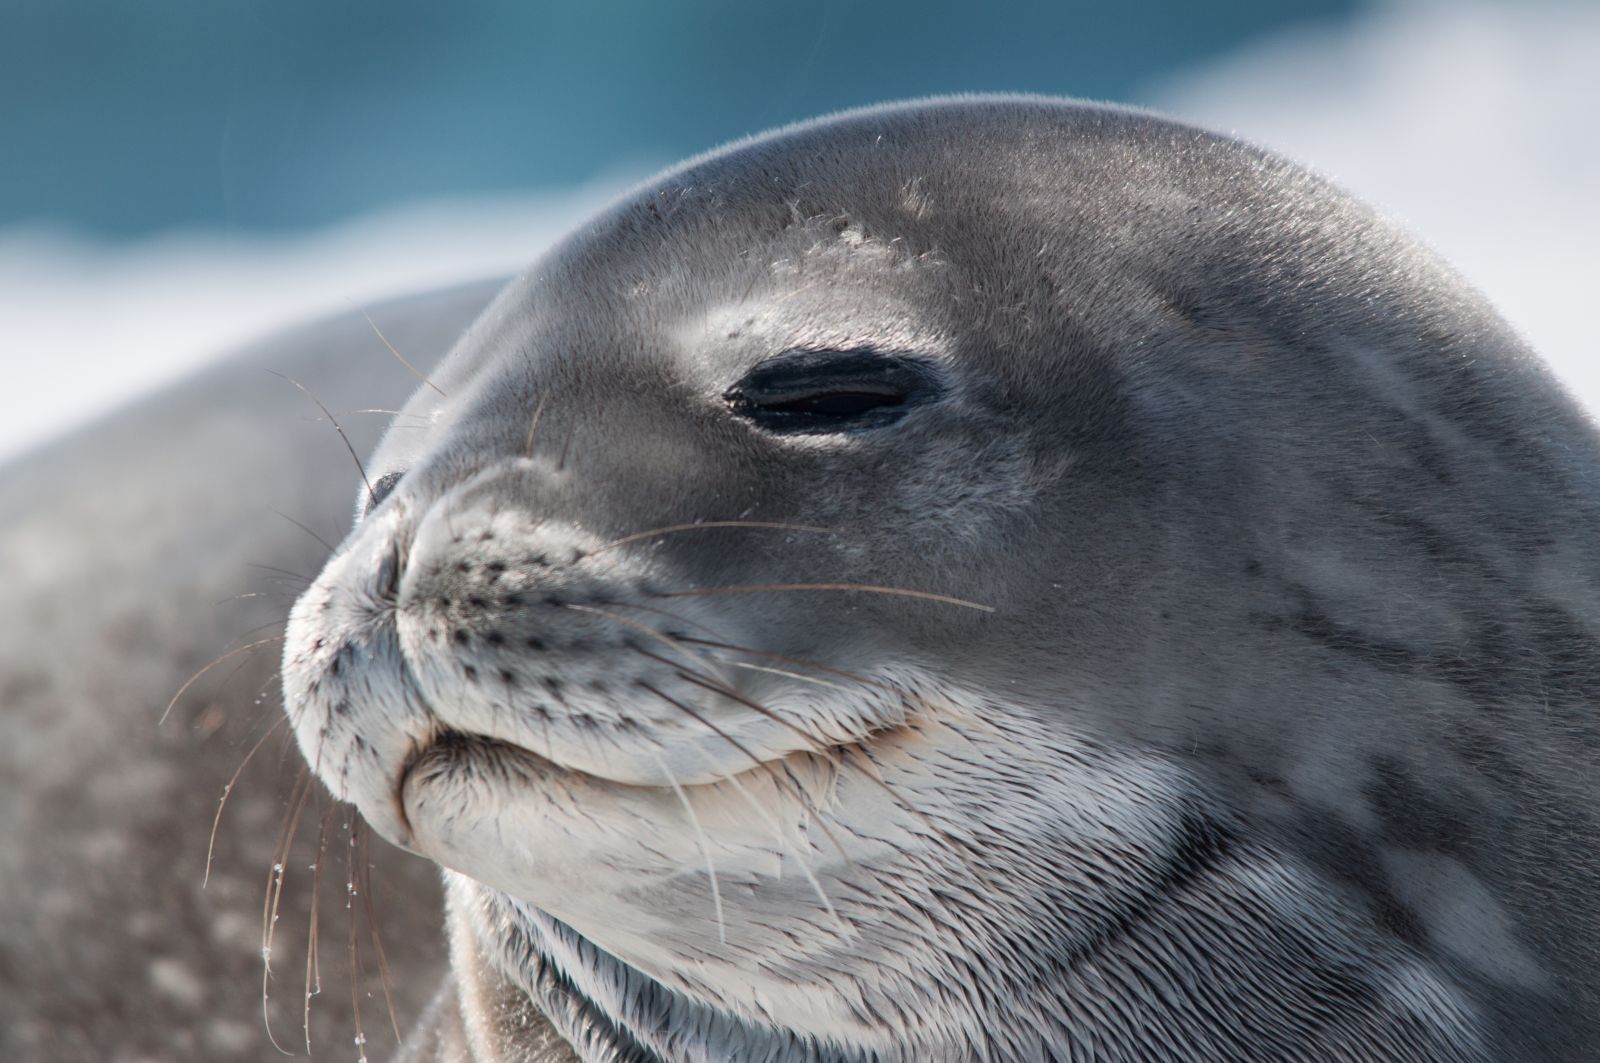 Close up image of leopard seal in Antarctica